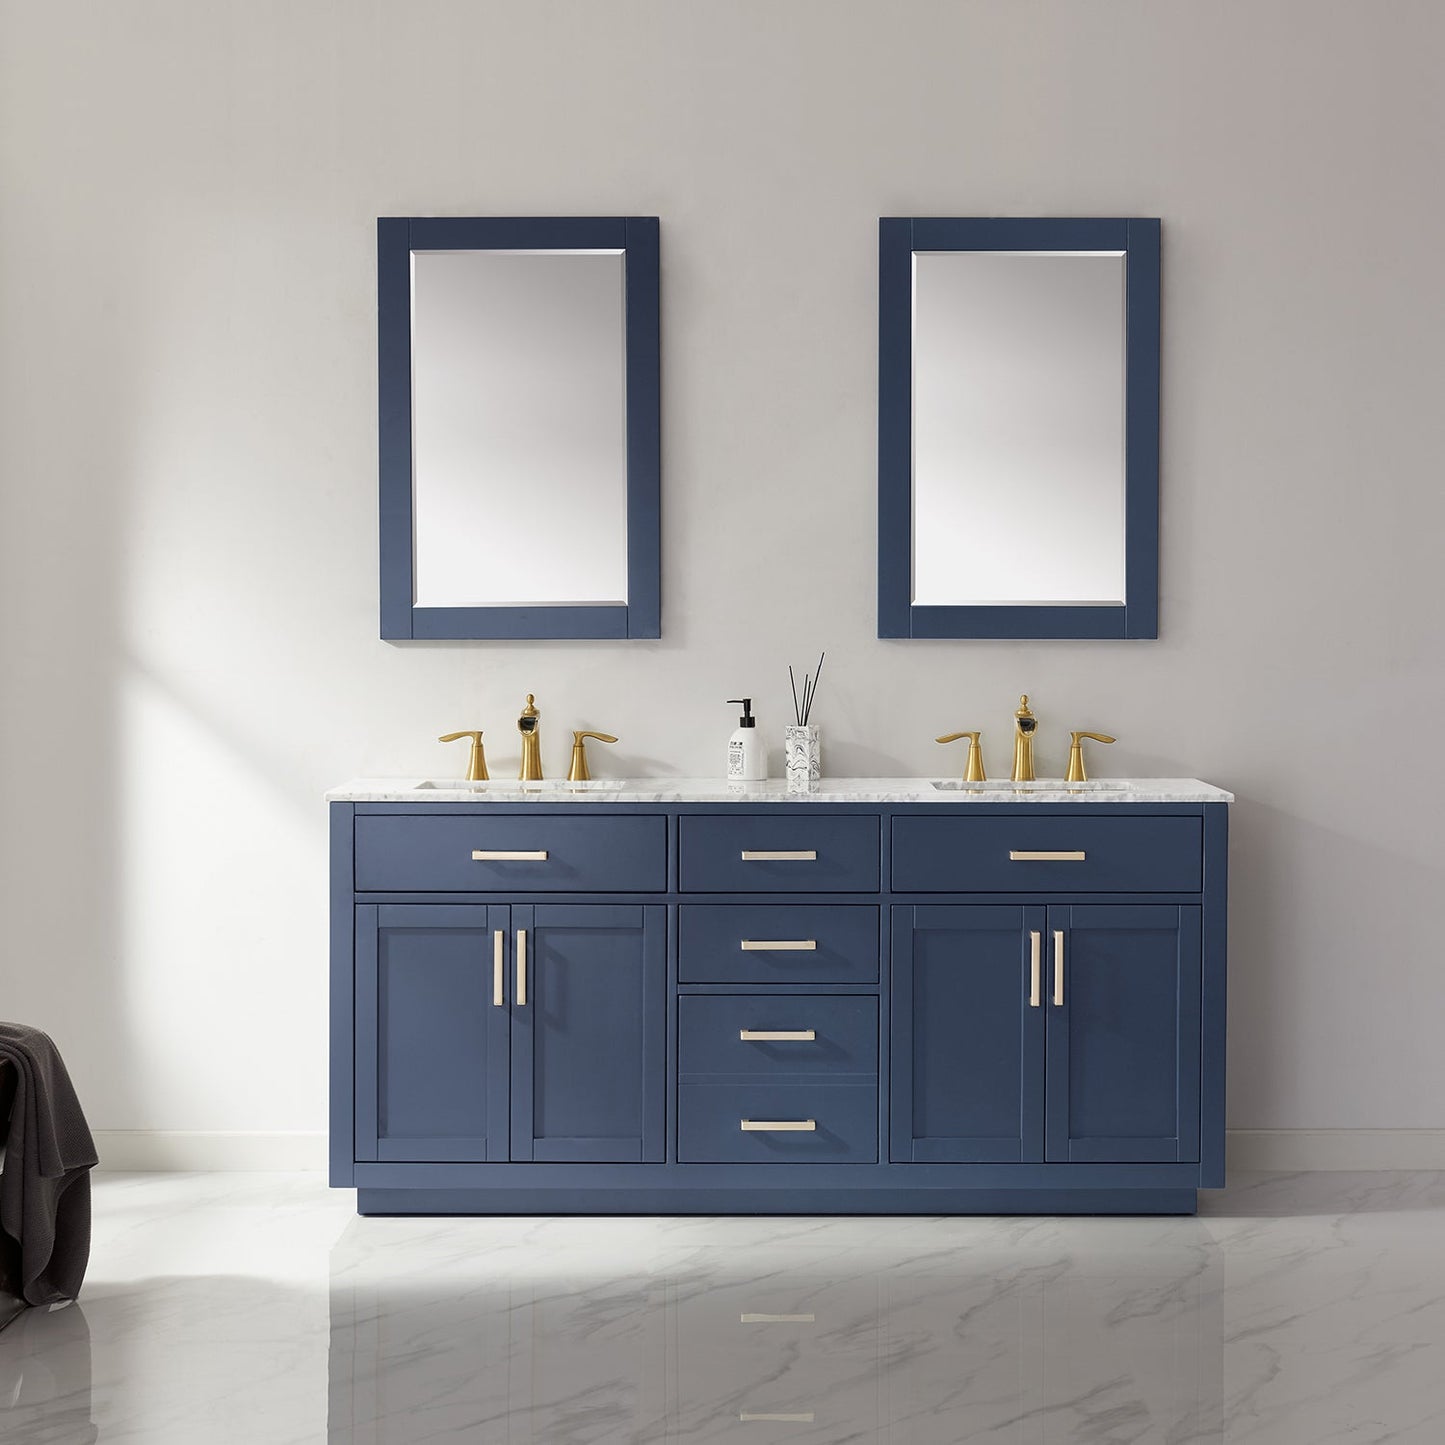 Ivy 72" Double Bathroom Vanity Set in Royal Blue and Carrara White Marble Countertop with Mirror